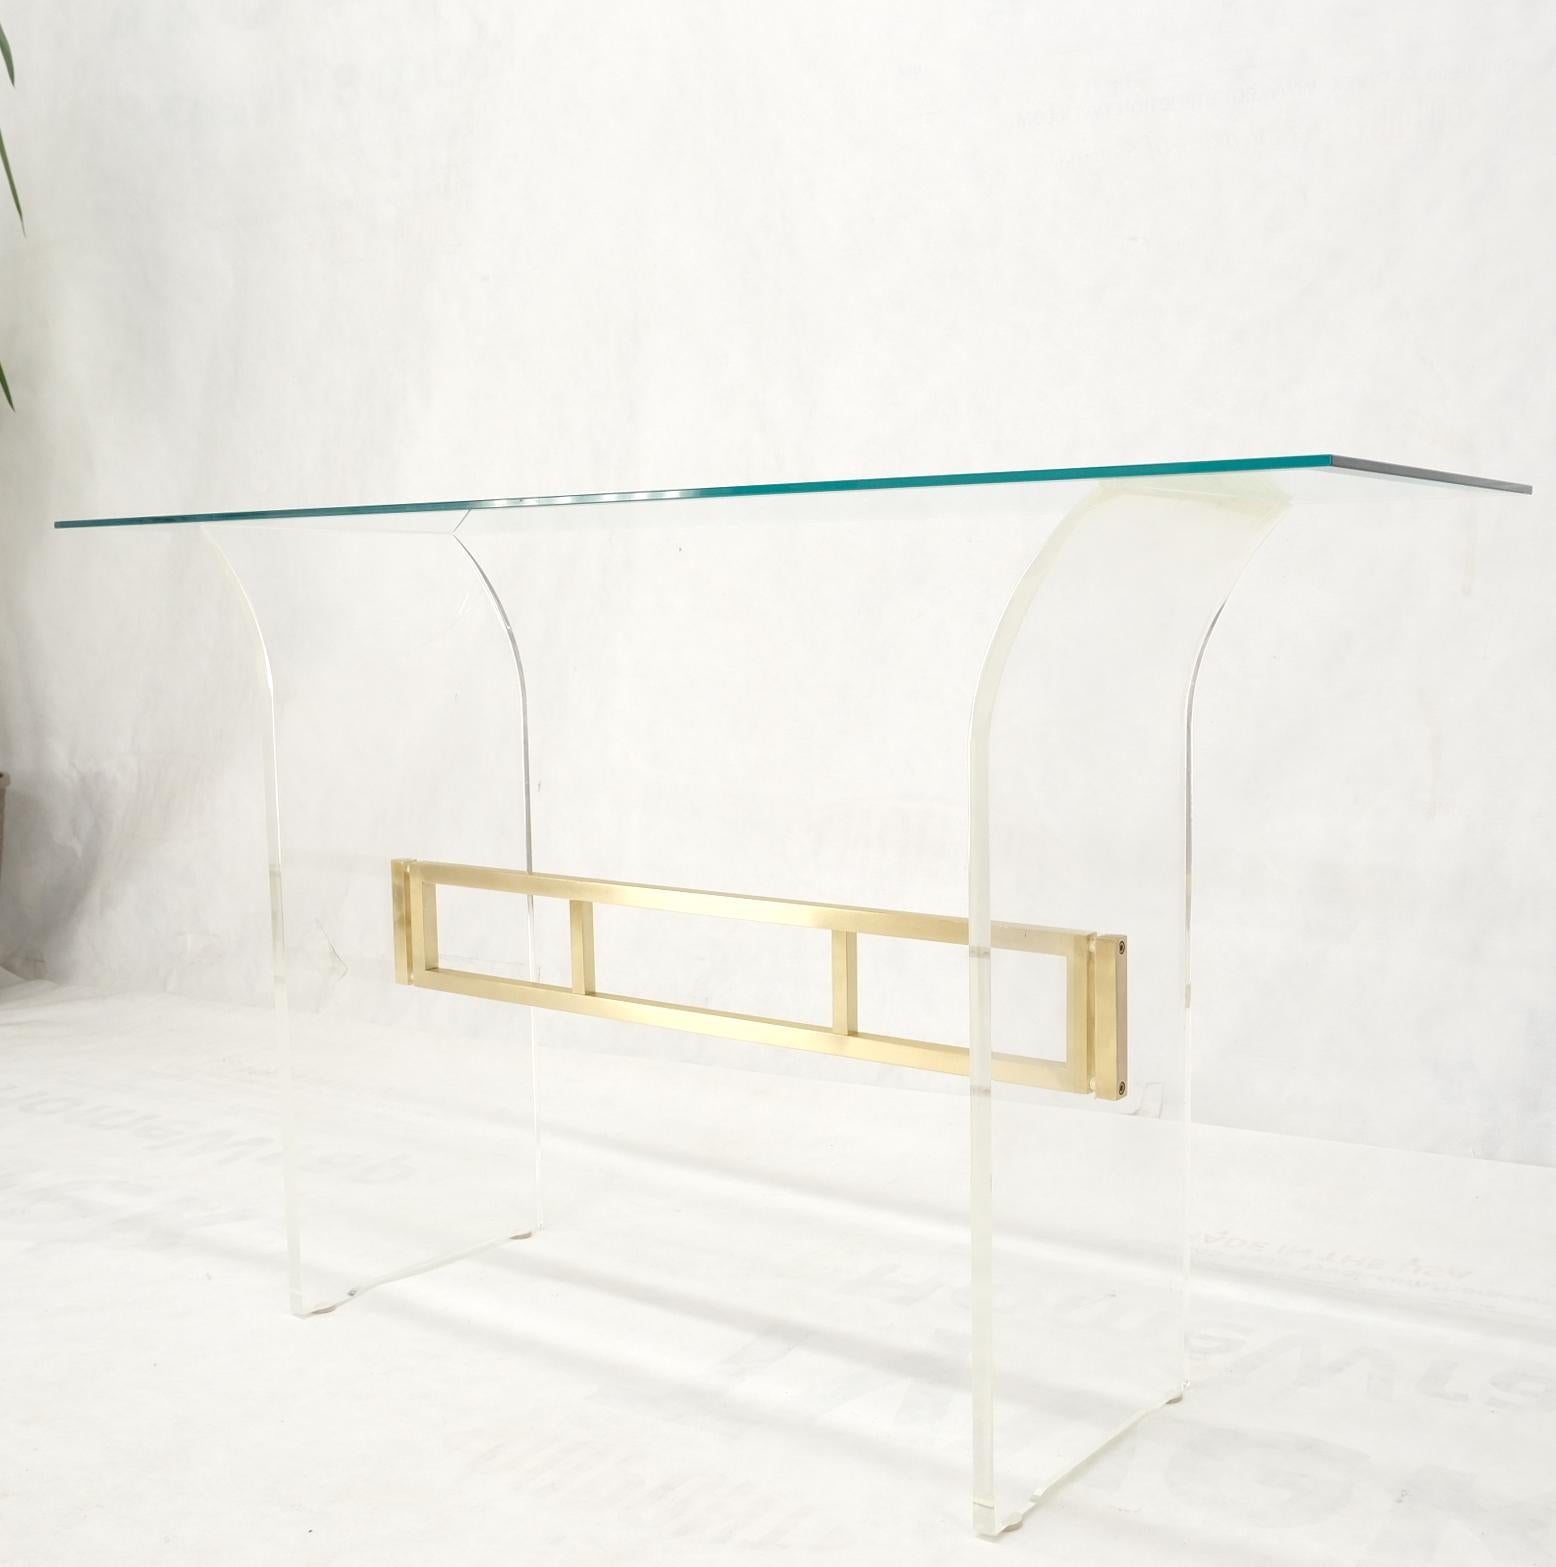 Lucite & brass base glass top console sofa table Mid-Century Modern mint
Glass measures 1/2'' in thickness.